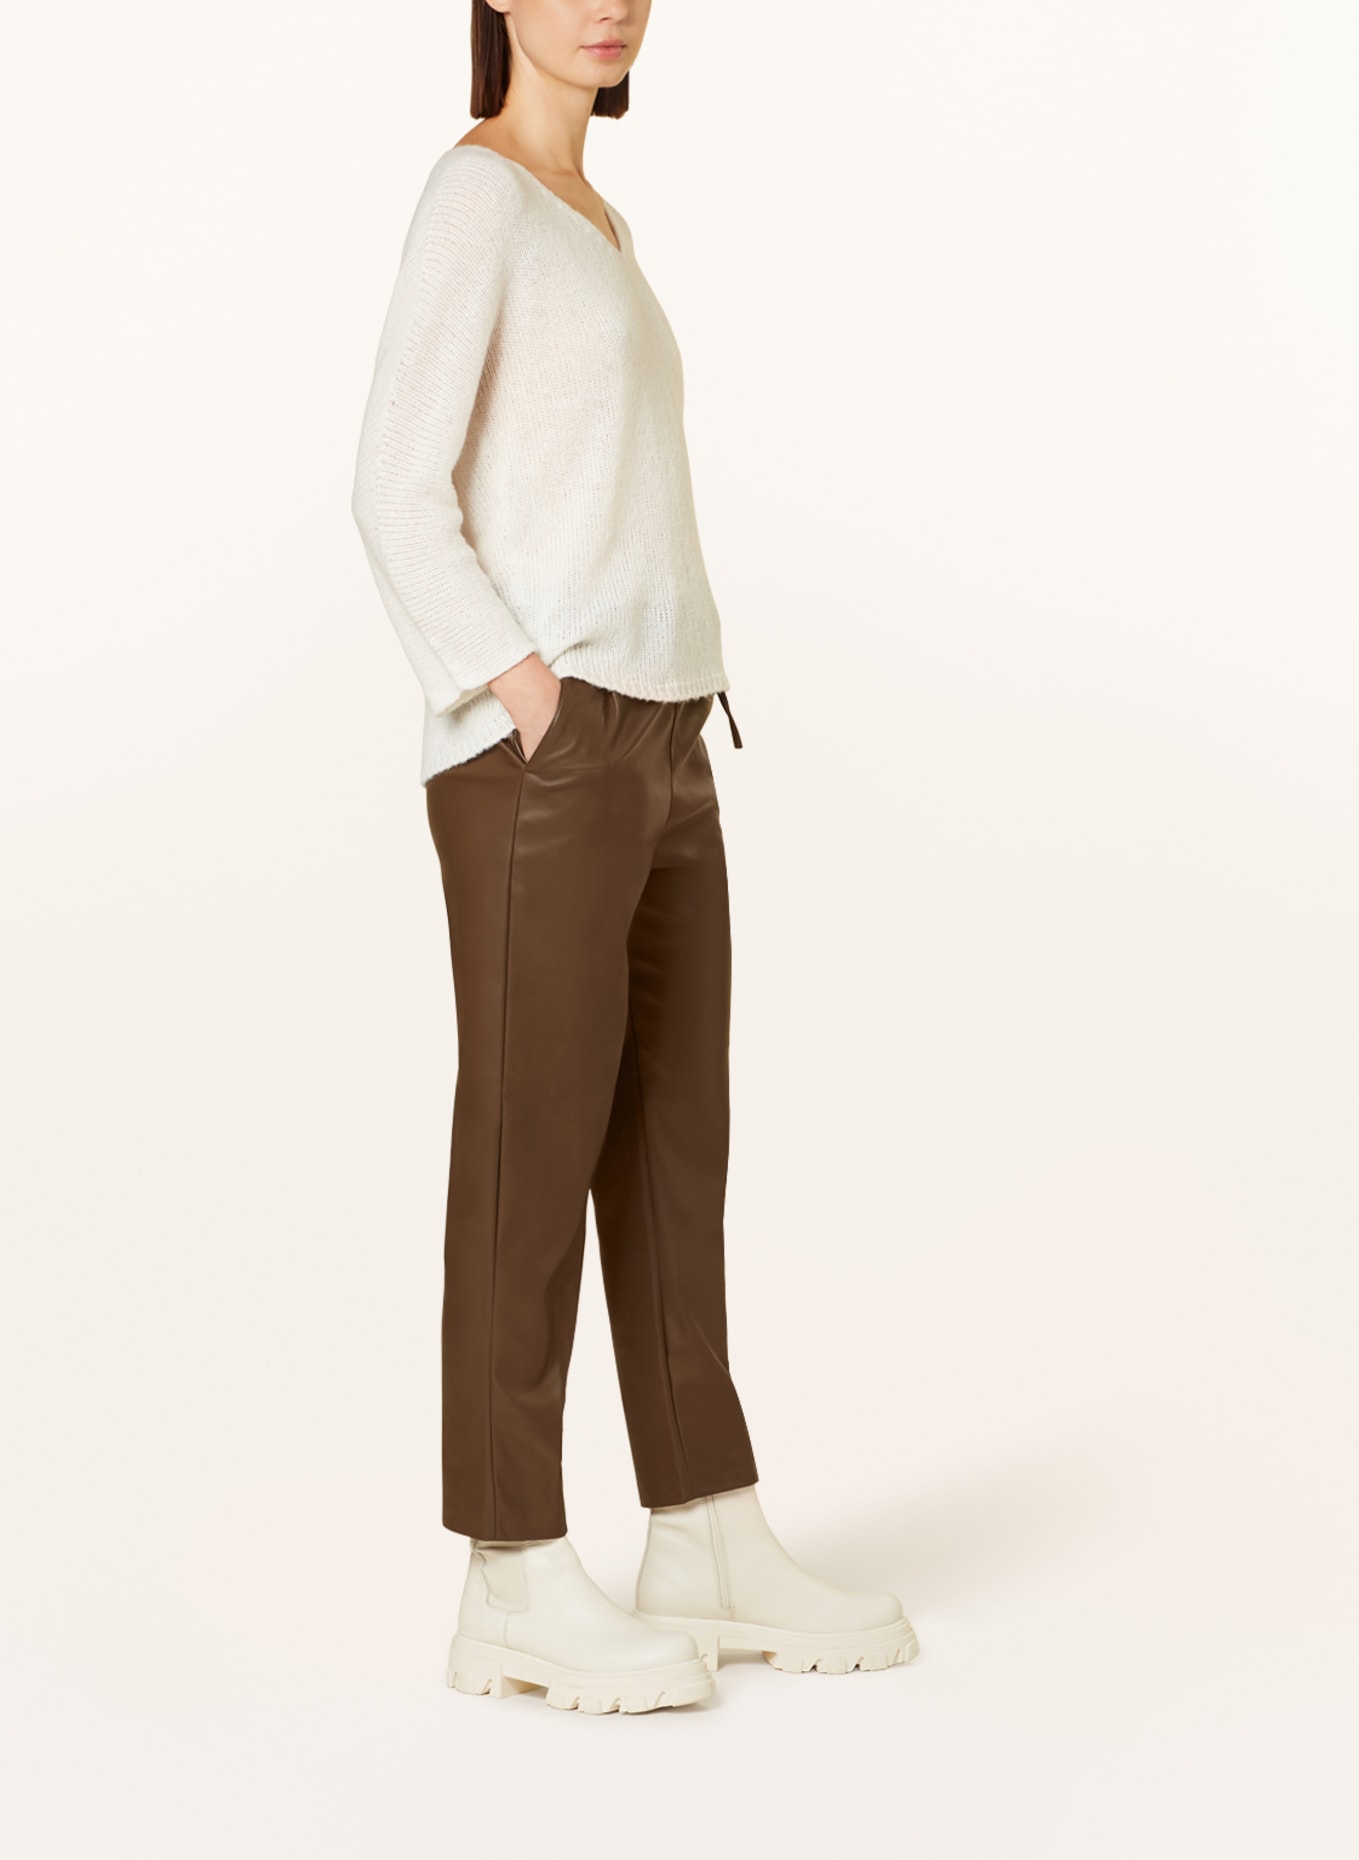 OPUS 7/8 trousers in jogger style in leather look, Color: DARK BROWN (Image 4)